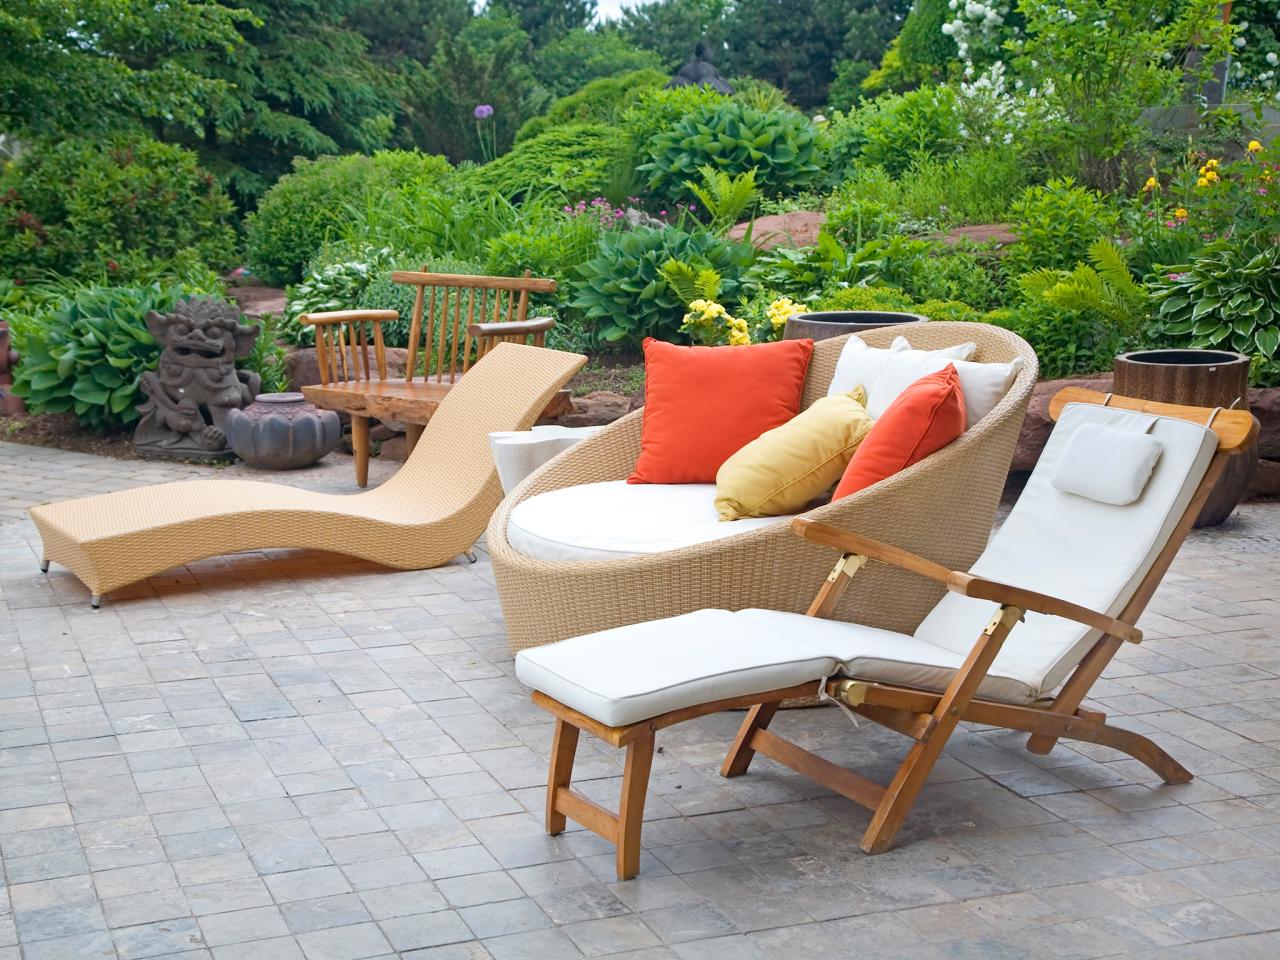 By the Yard - Outdoor Furniture